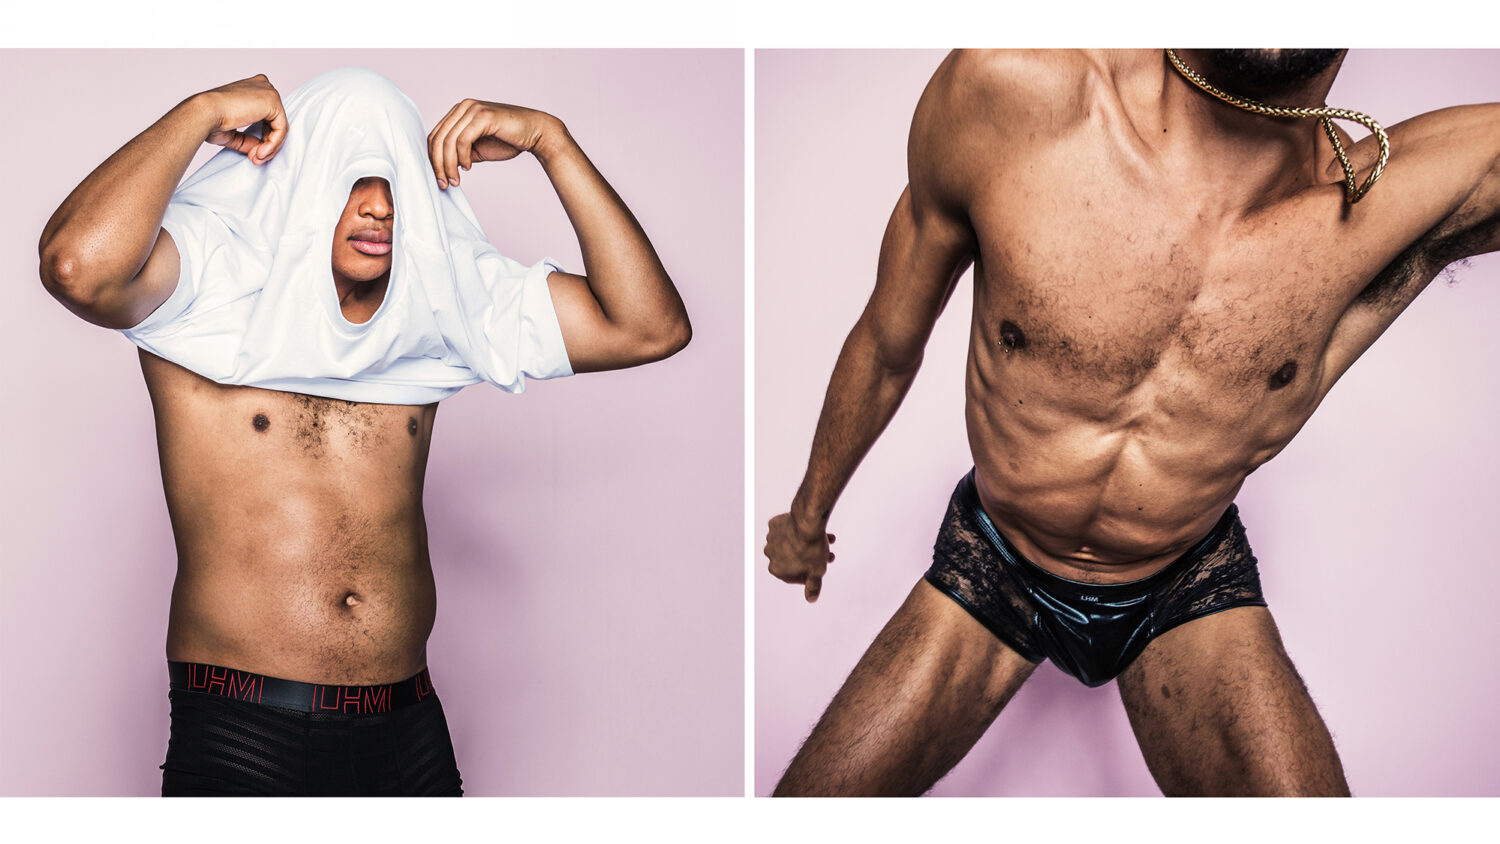 torso's of 2 men on pink background wearing underwear for LHM campaign photography by photographer Colin Hawkins